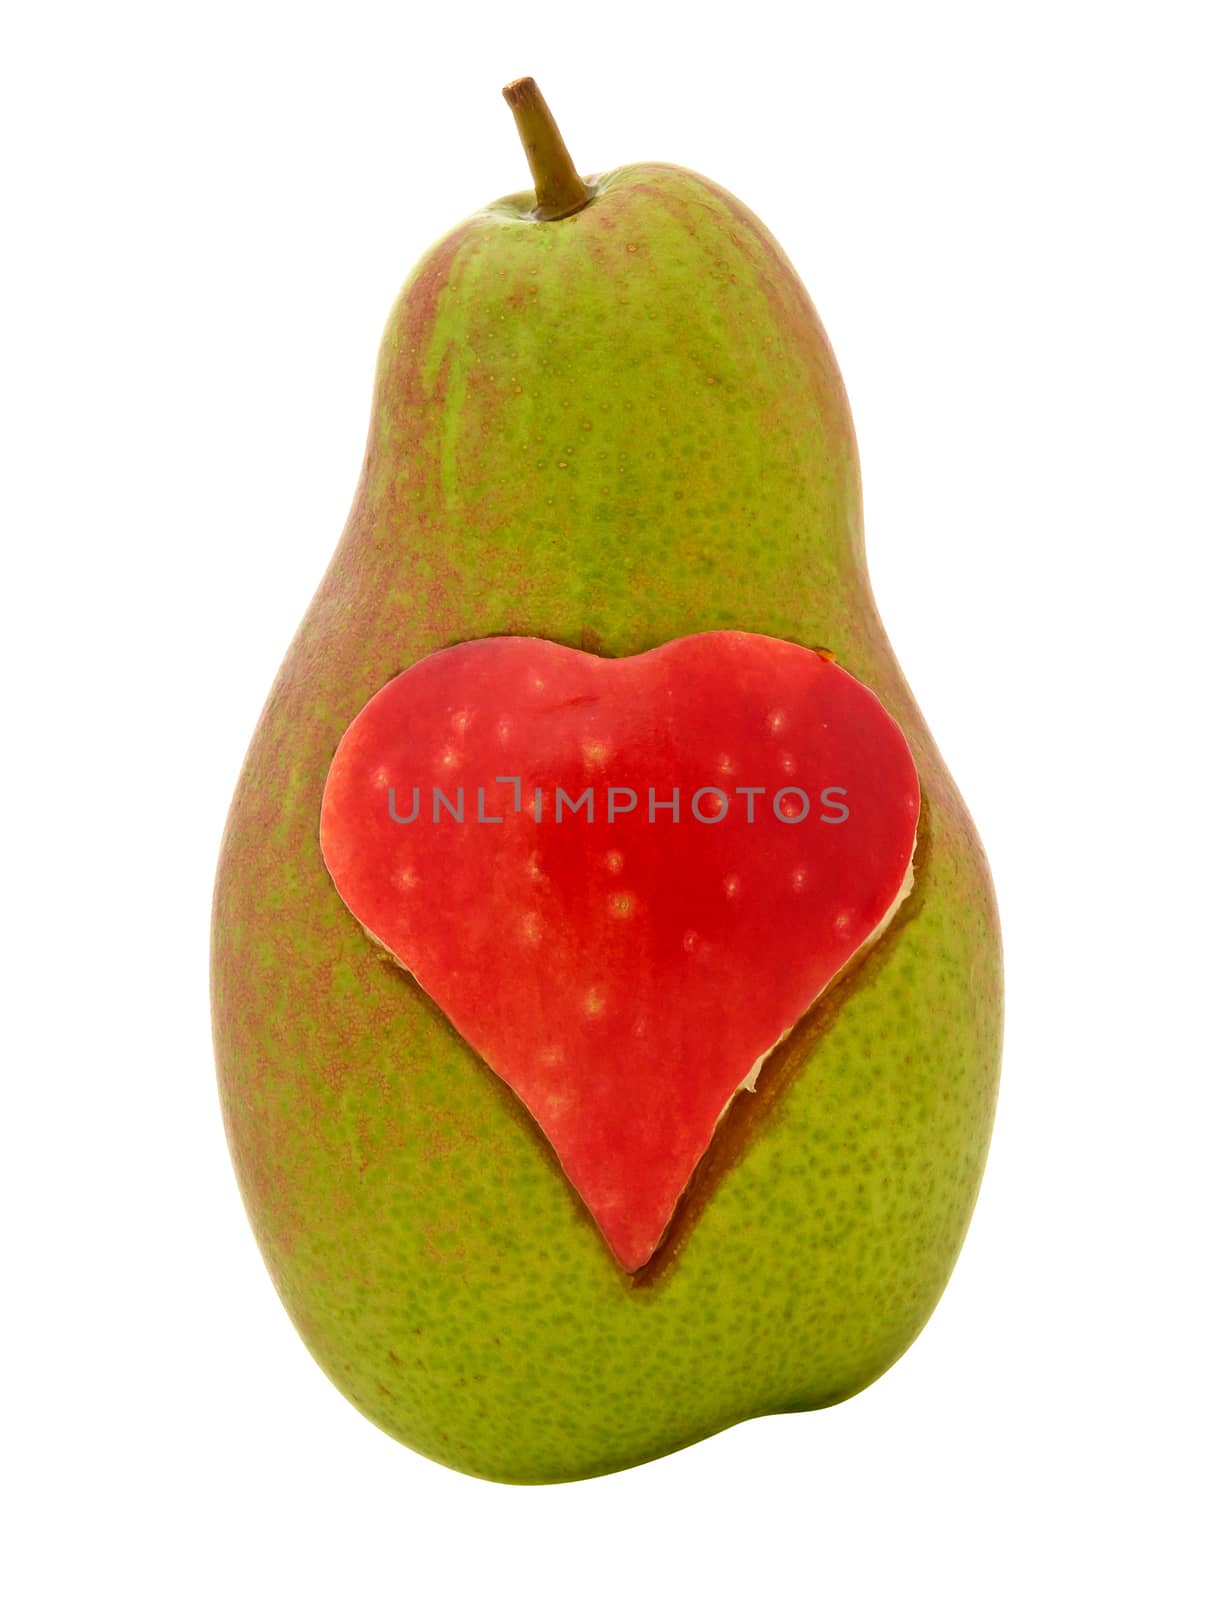 Green juicy pear with a heart symbol from red apple. Clipping path included.